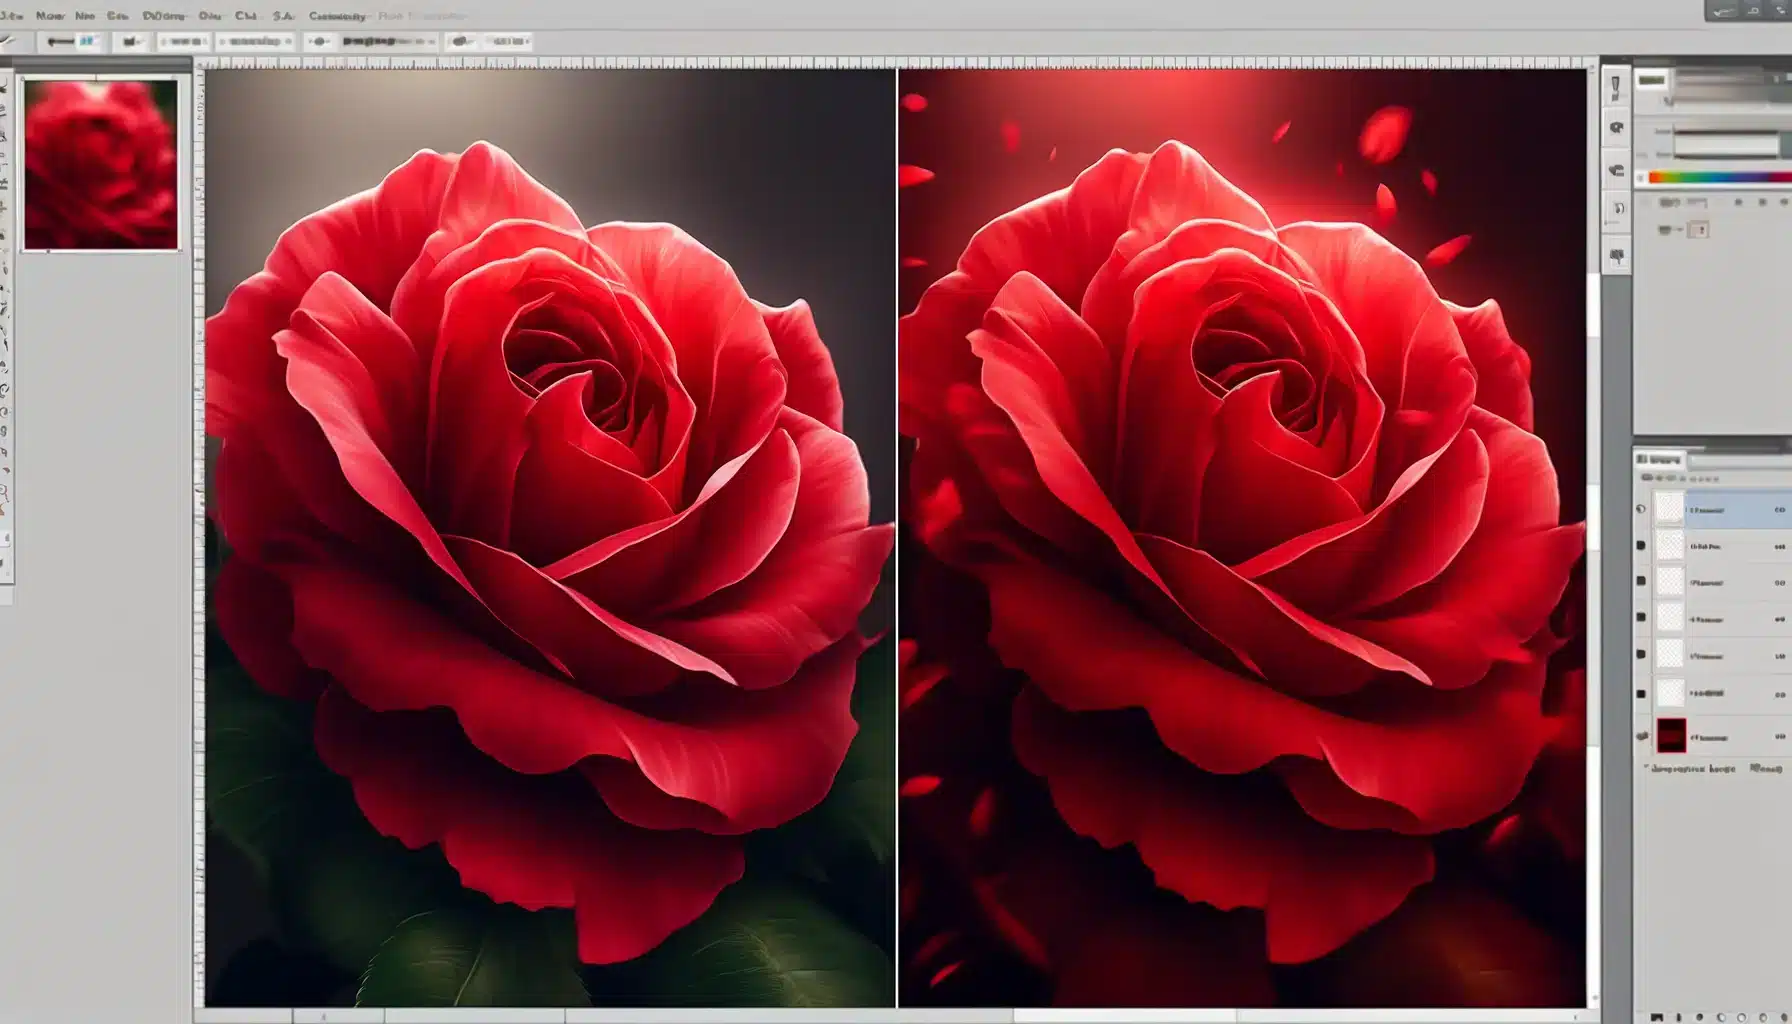 Digital art tutorial image showing a red rose with two different Photoshop effects: feathering on the left, creating a soft edge transition, and blurring on the right, making the entire rose appear out of focus.